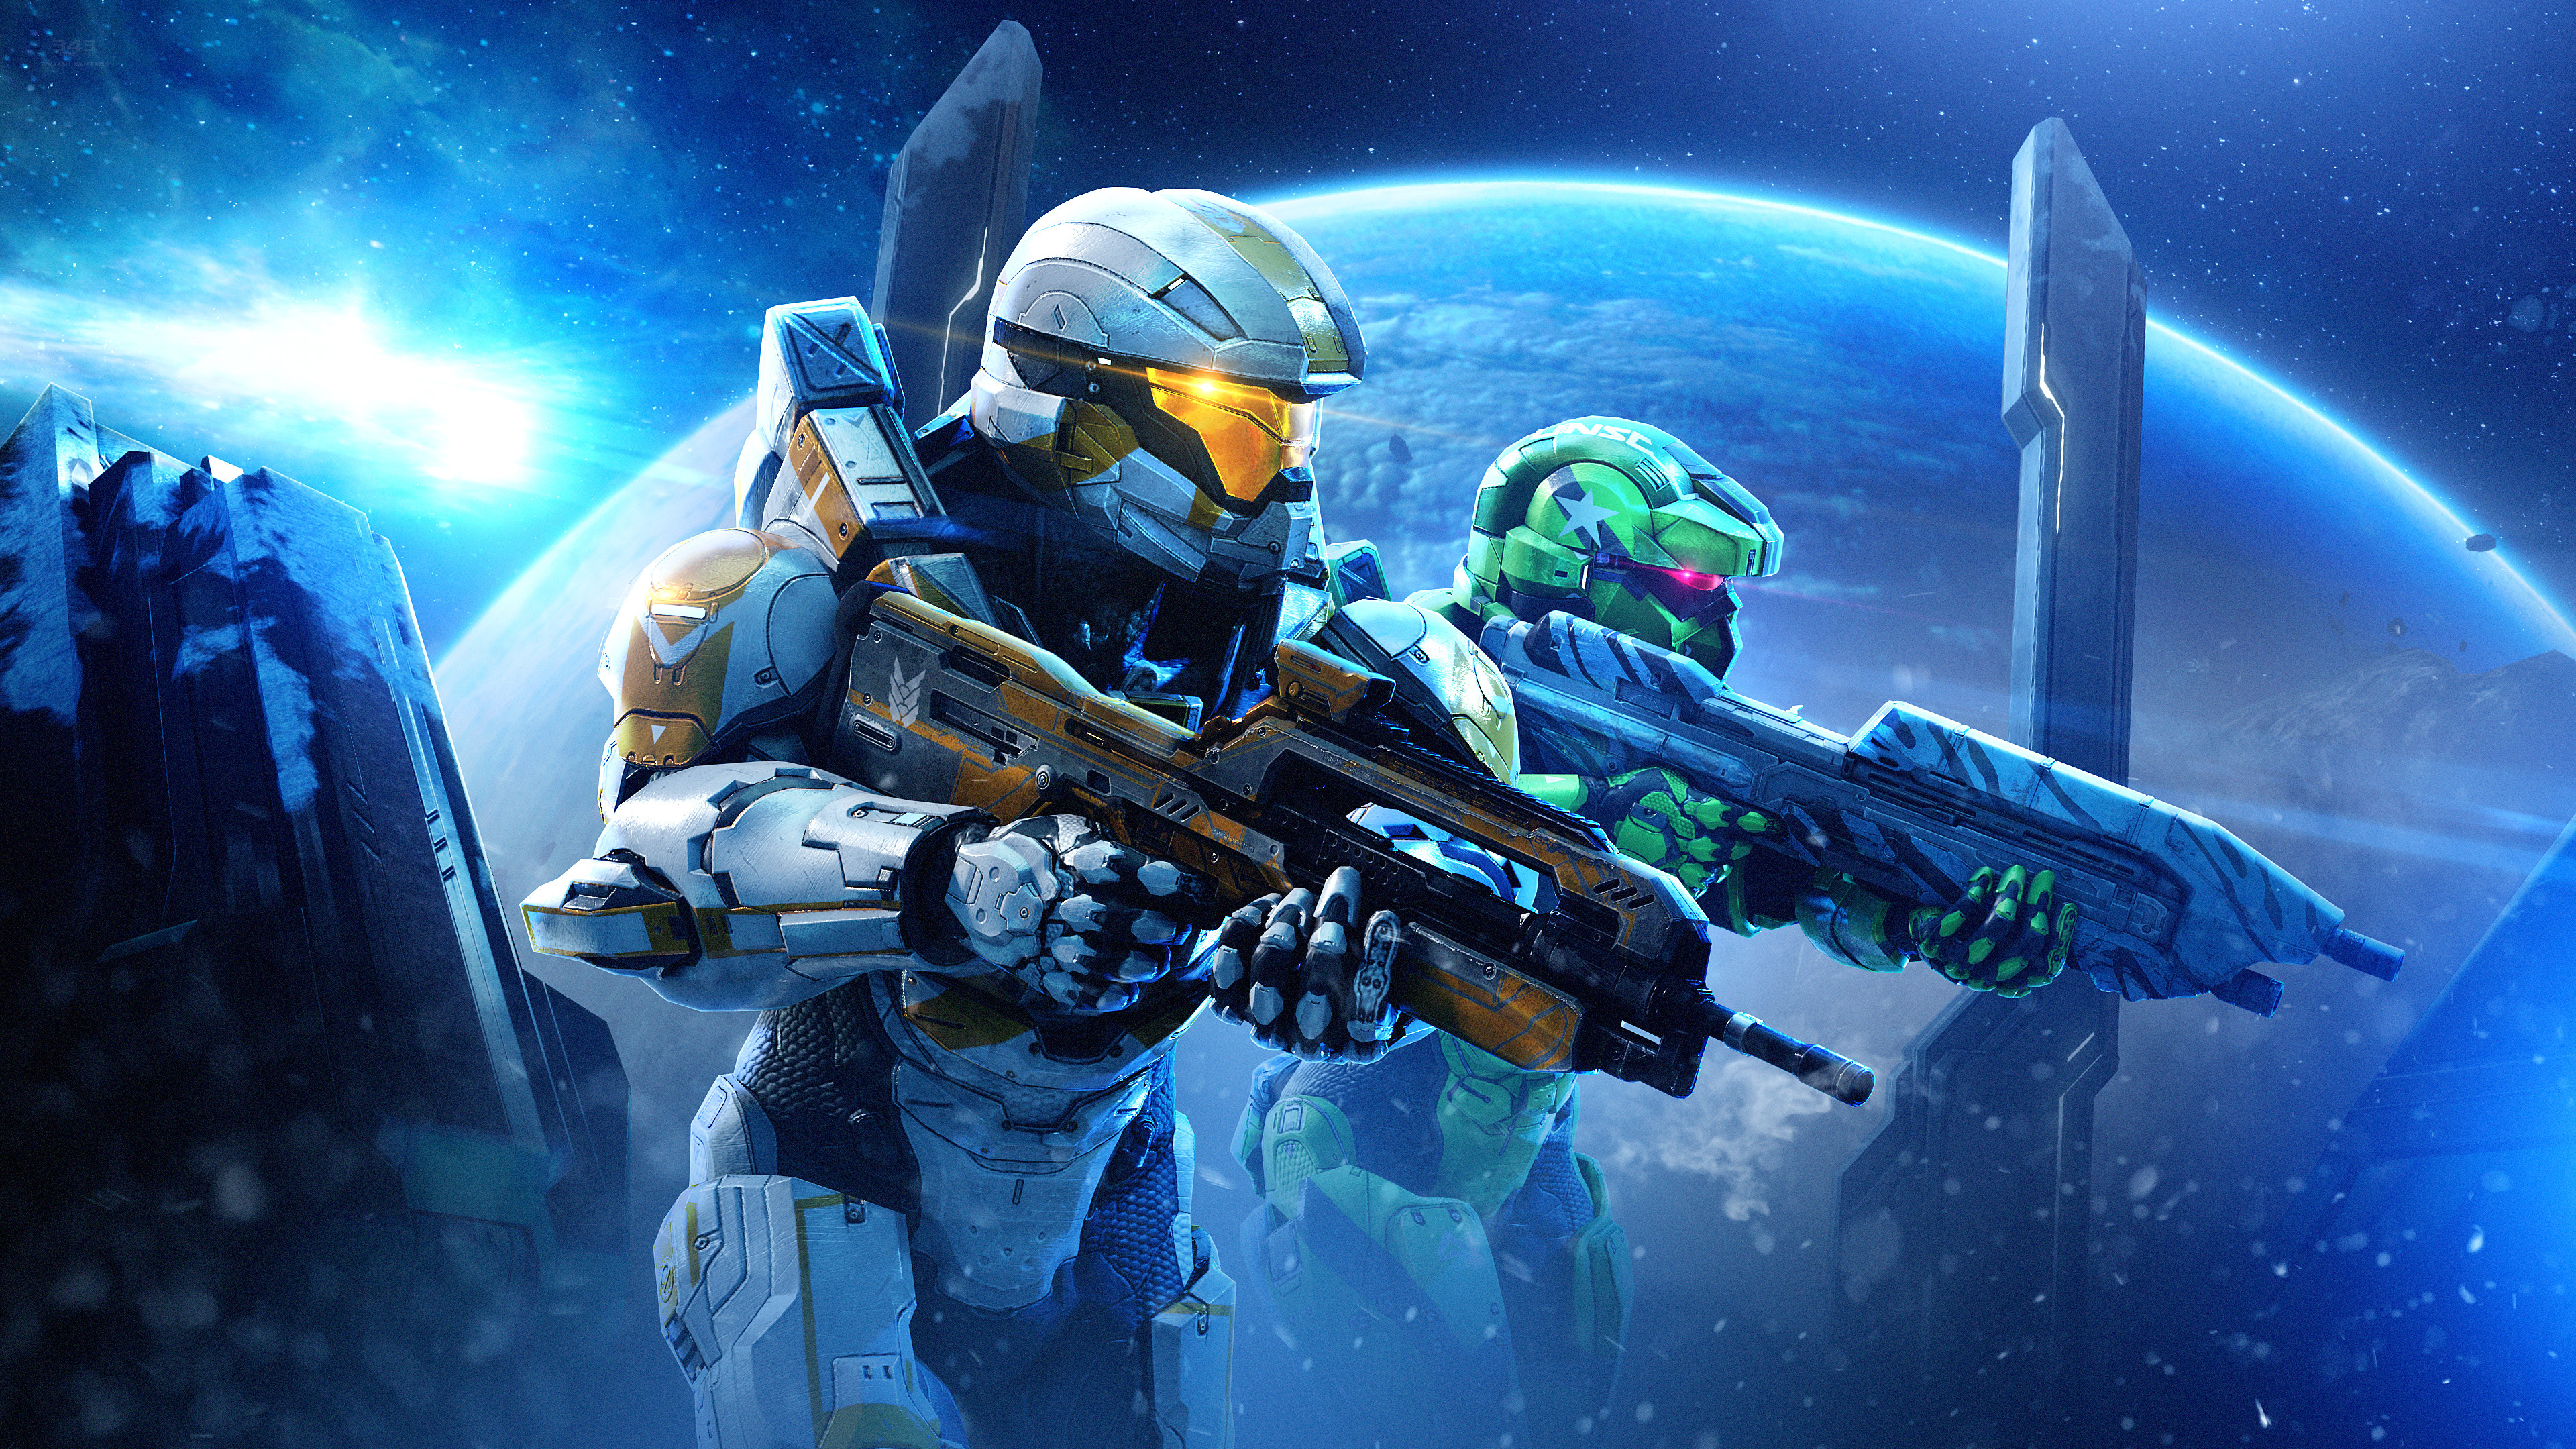 Video Game Halo: The Master Chief Collection HD Wallpaper | Background Image